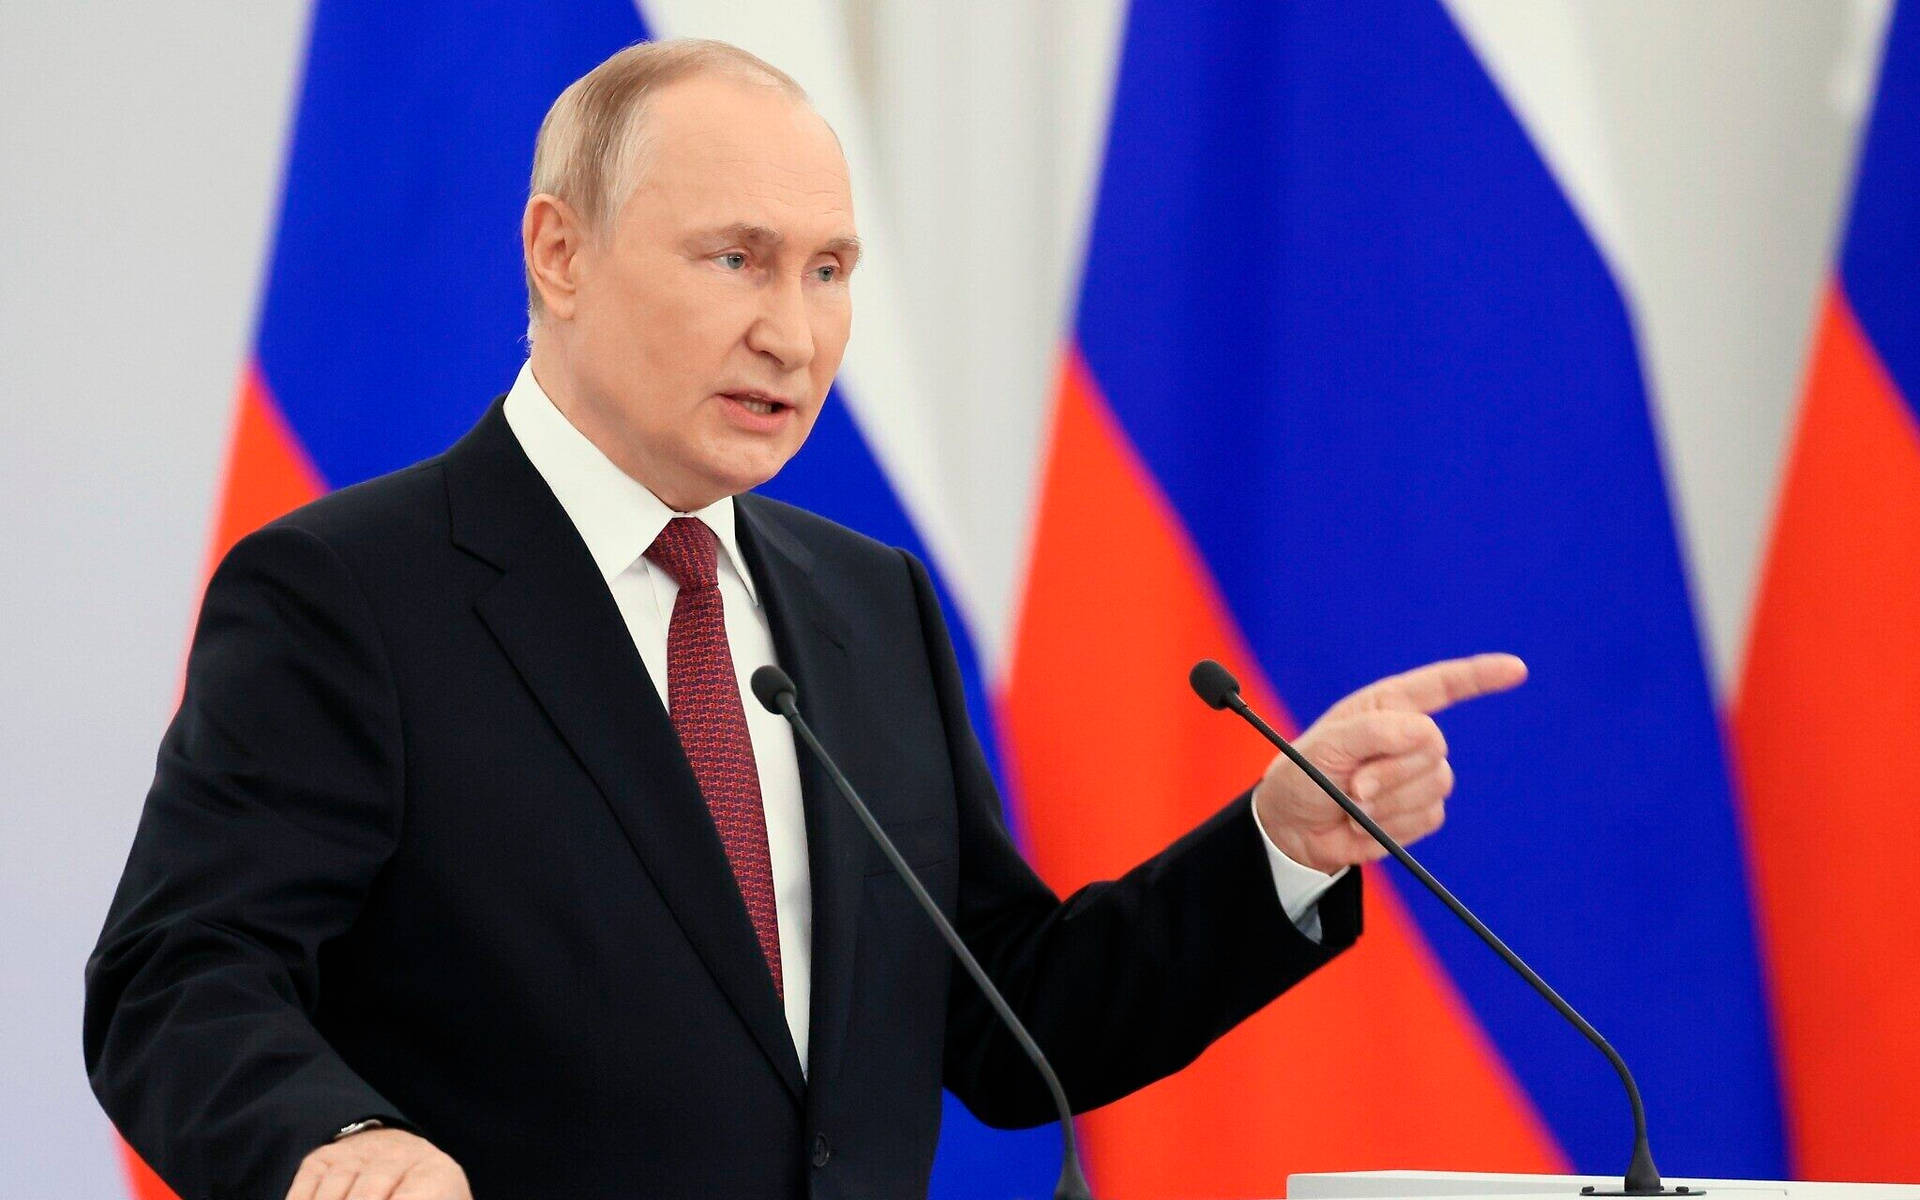 Putin Believes Decentralization Will Help Global Economy Be More Resilient